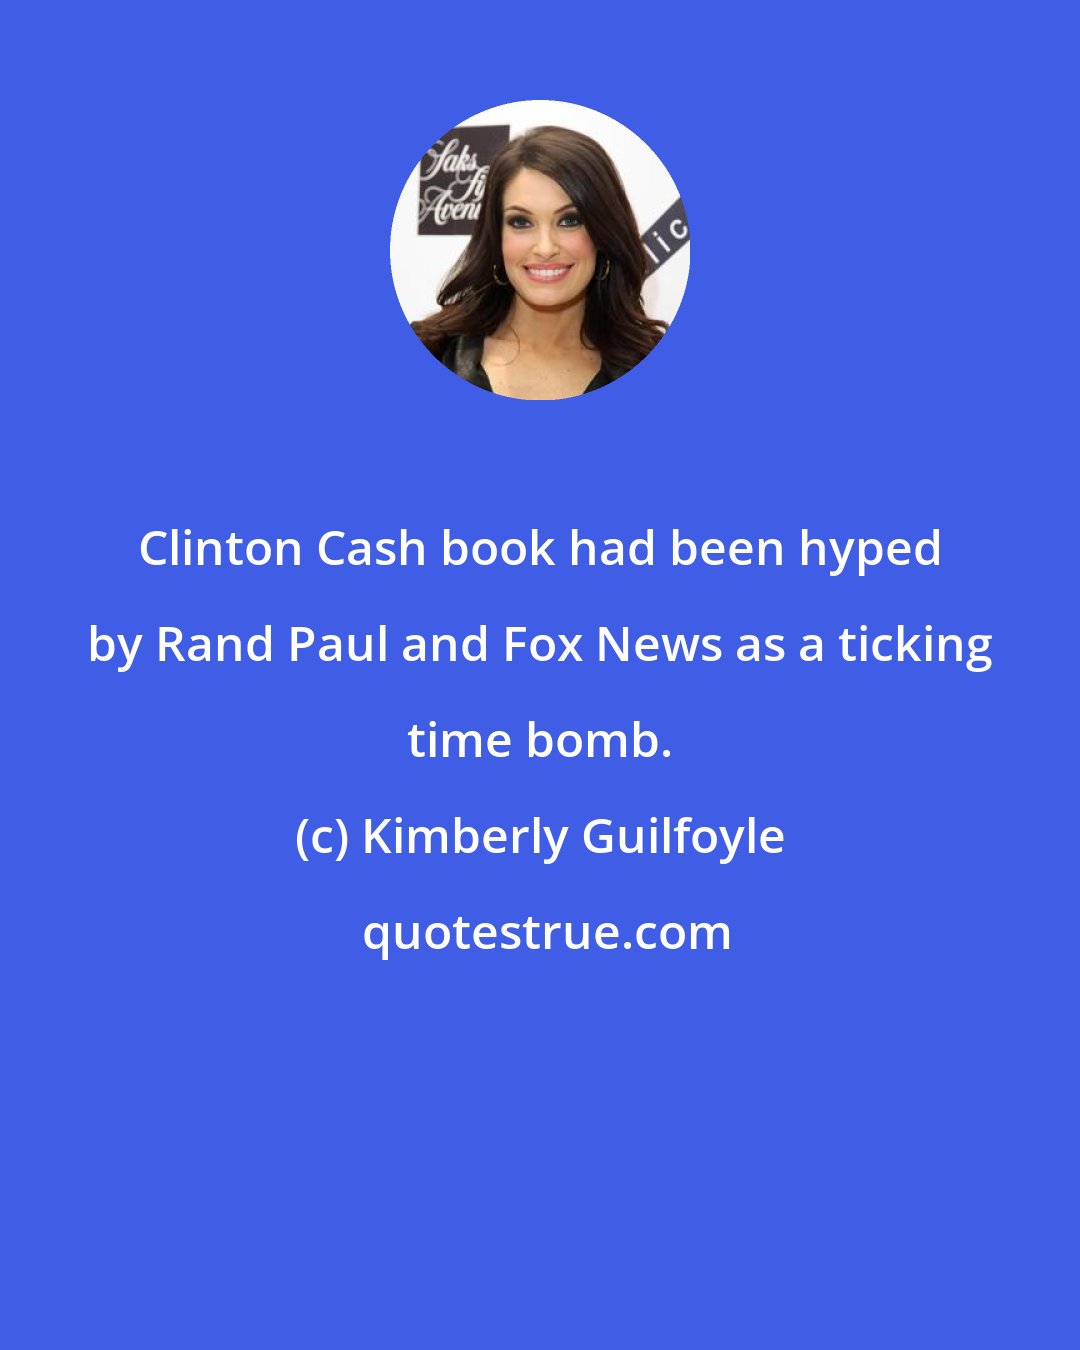 Kimberly Guilfoyle: Clinton Cash book had been hyped by Rand Paul and Fox News as a ticking time bomb.